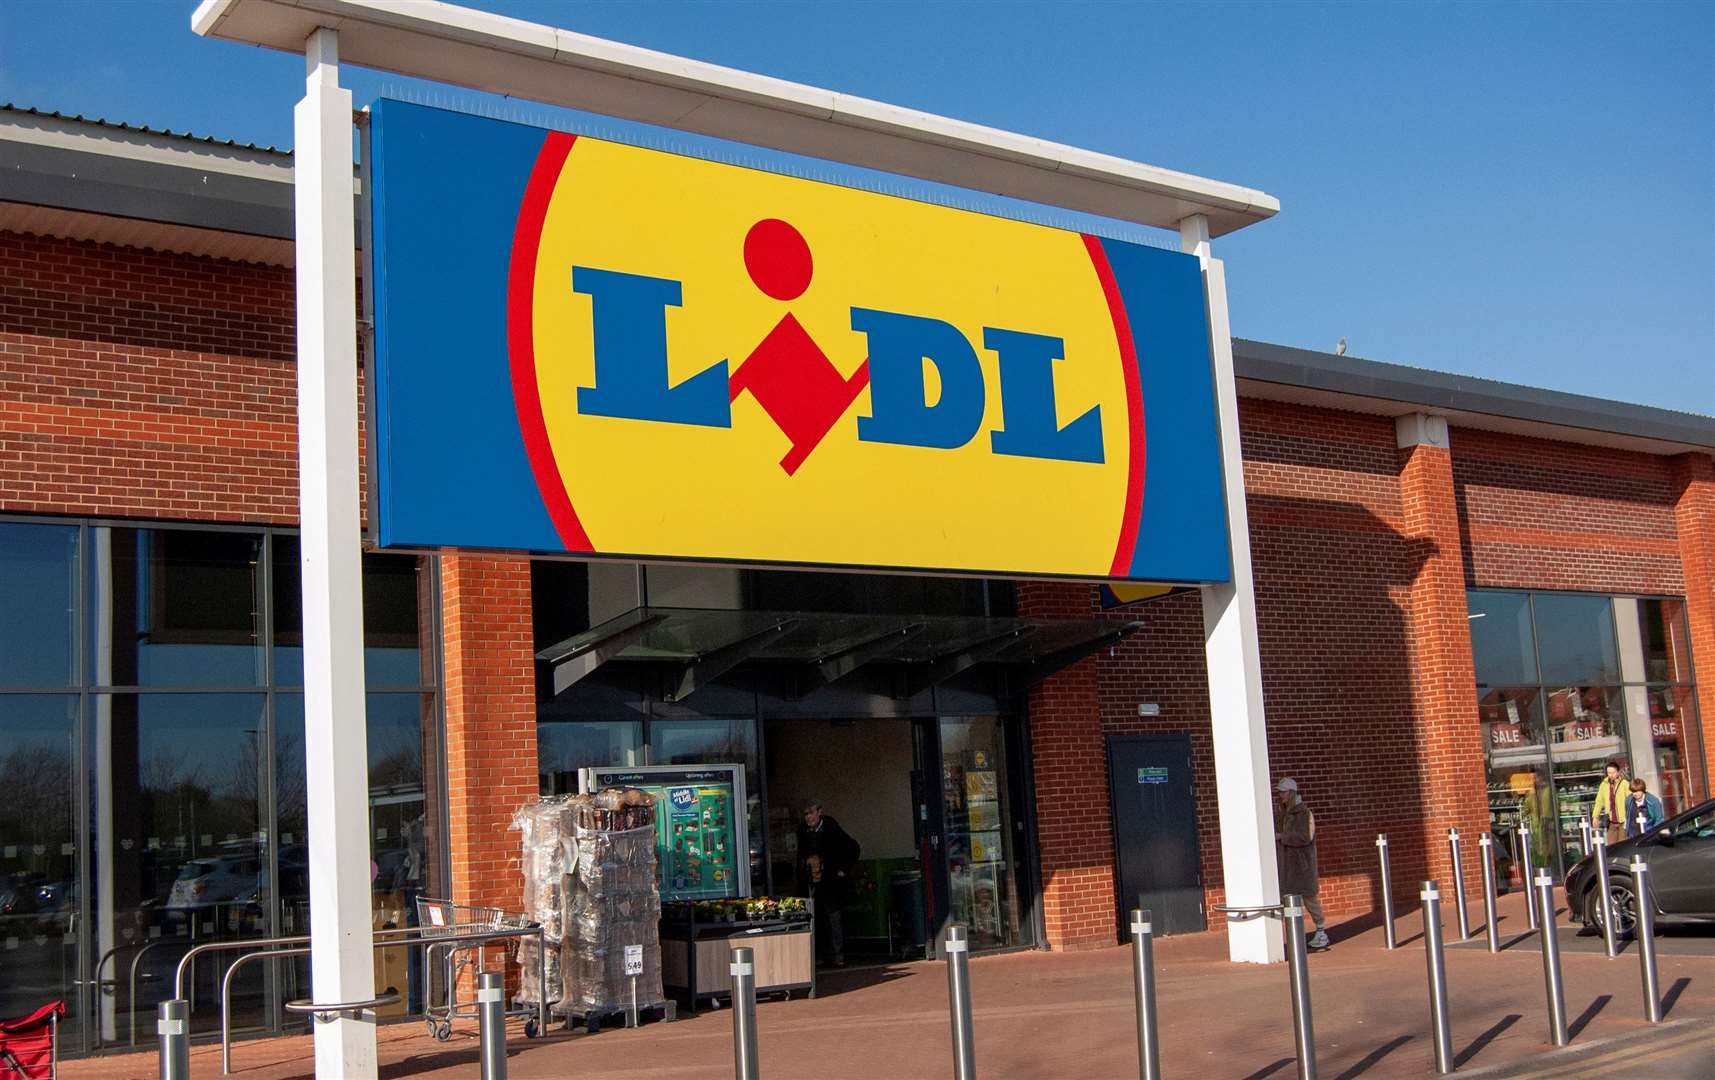 Deals are released every Thursday on the Lidl app